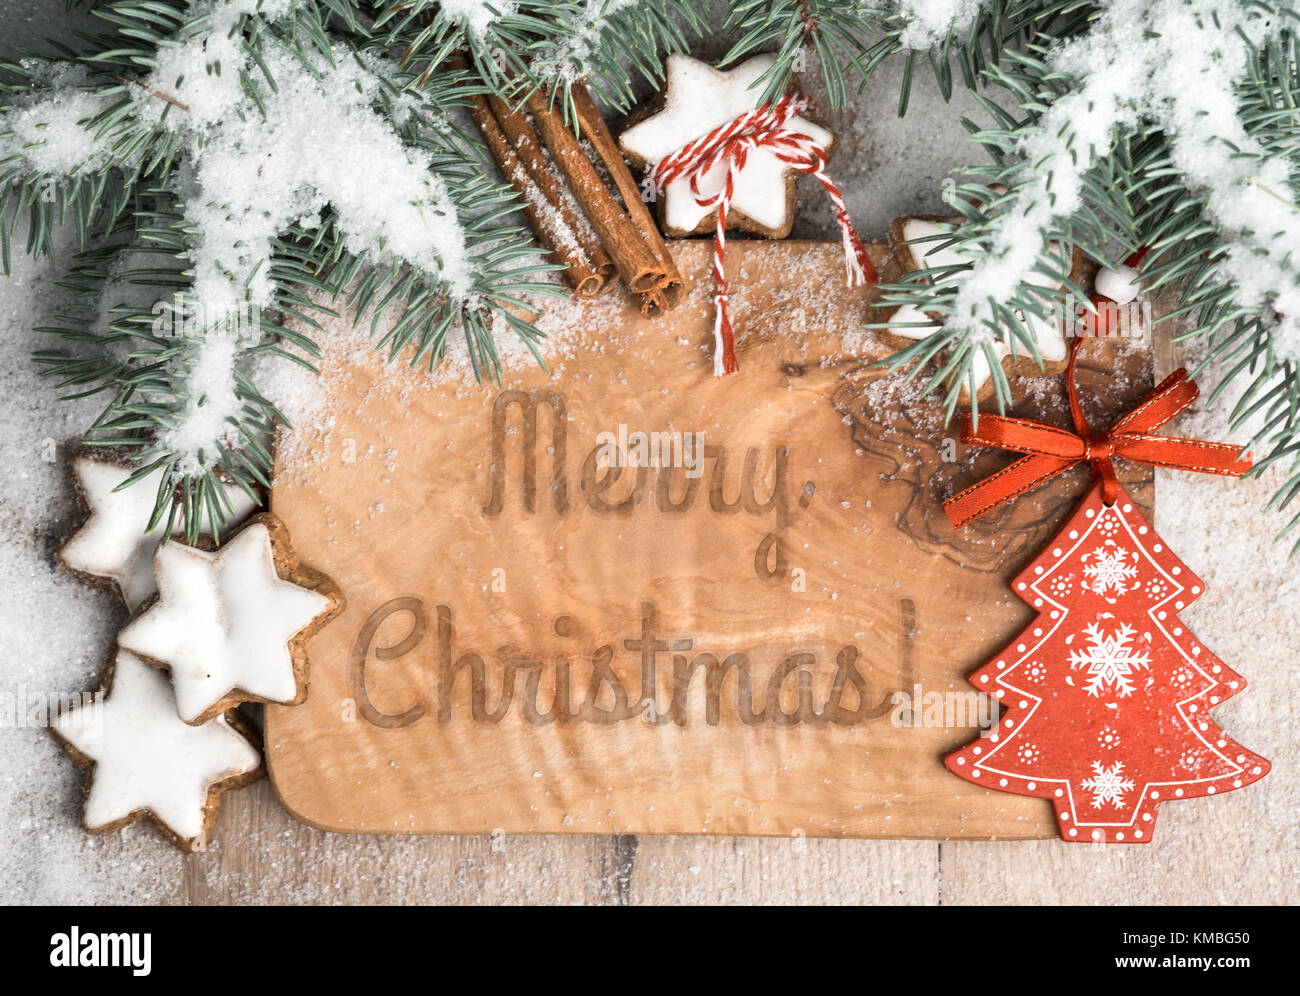 Merry Christmas Burning Subtitles In Wood Stock Photo - Download